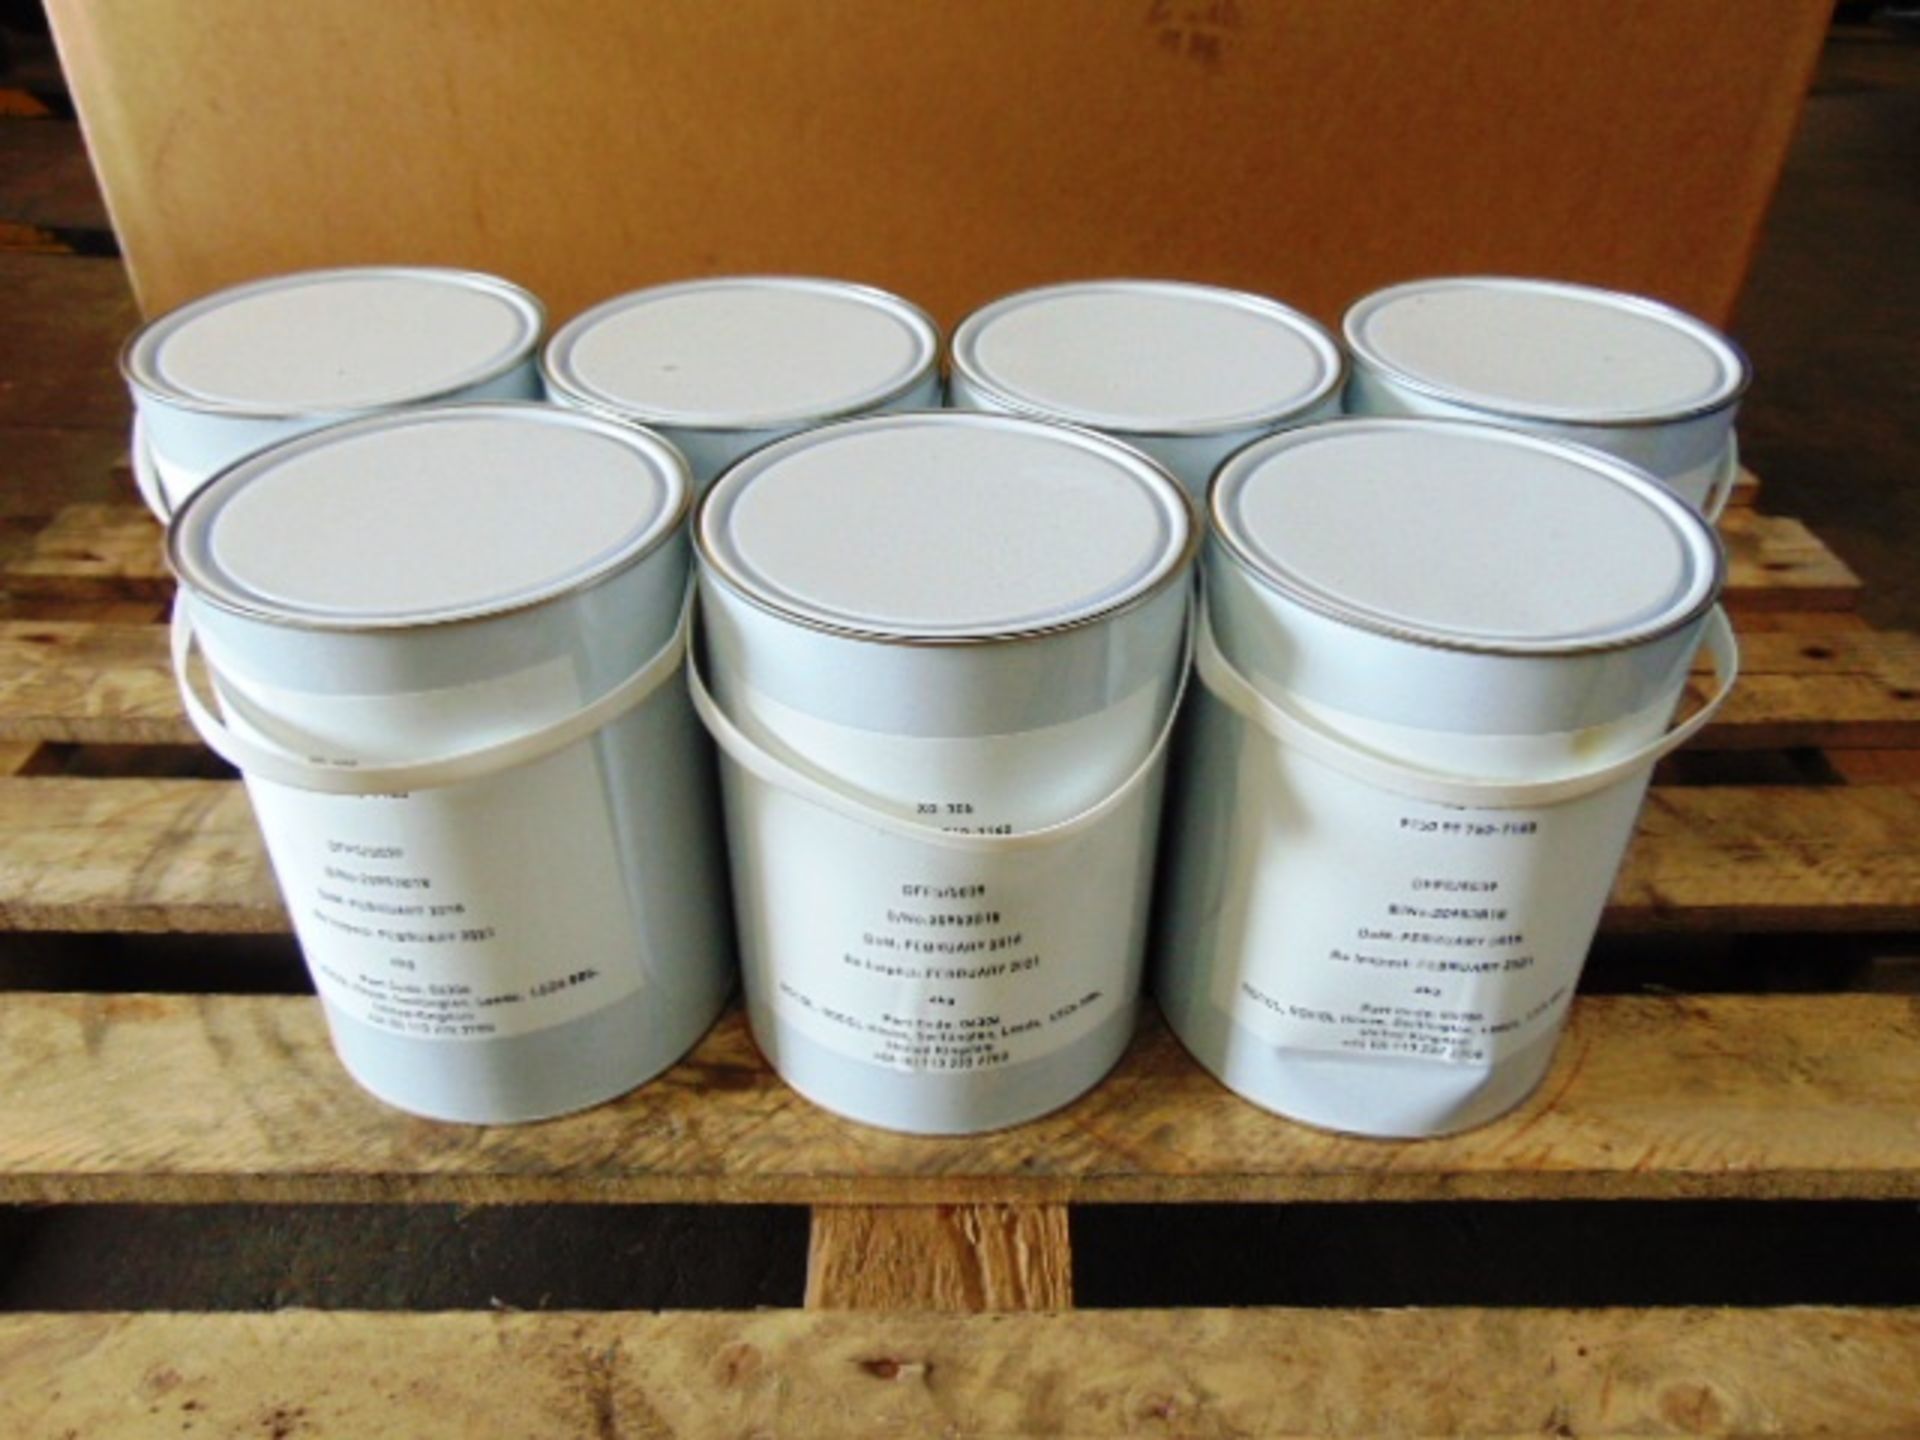 7 x Unissued 4Kg Tins of Rocol XG-305 Molybdenum Disulphide Grease